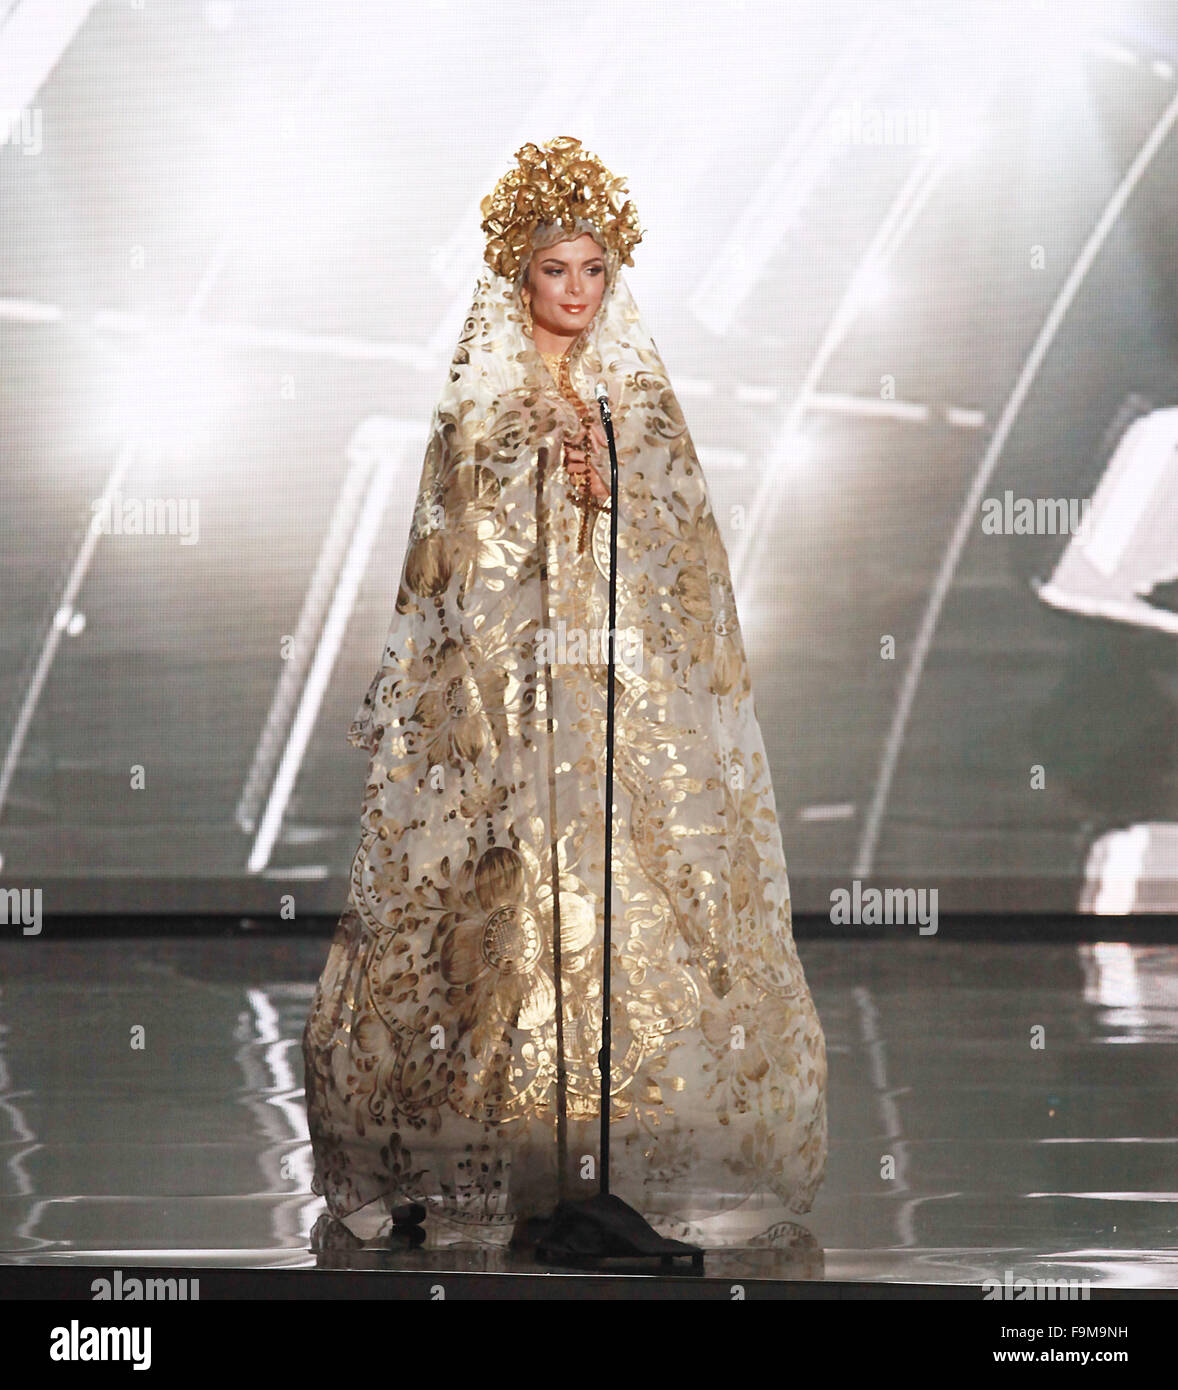 Las Vegas, Nevada, USA. 16th Dec, 2015. Miss Peru Laura Spoya participates in the National Costume Show during the 2015 Miss Universe Pageant Preliminary Competition and National Costume Show on December 16, 2015 at the AXIS Theater inside Planet Hollywood Resort & Casino in Las Vegas Nevada. Credit:  Marcel Thomas/ZUMA Wire/Alamy Live News Stock Photo